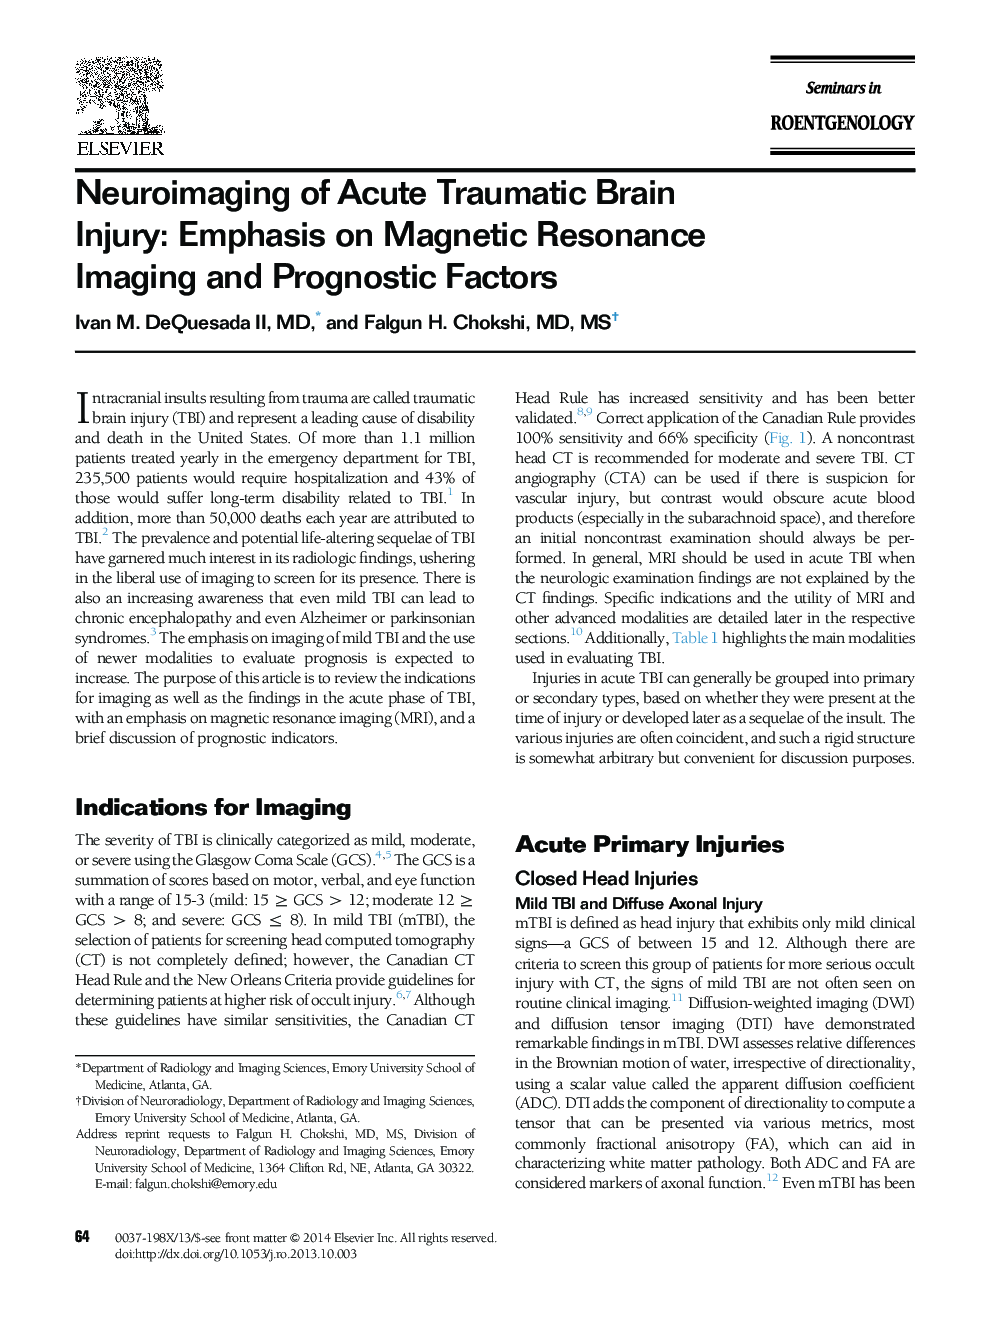 Neuroimaging of Acute Traumatic Brain Injury: Emphasis on Magnetic Resonance Imaging and Prognostic Factors